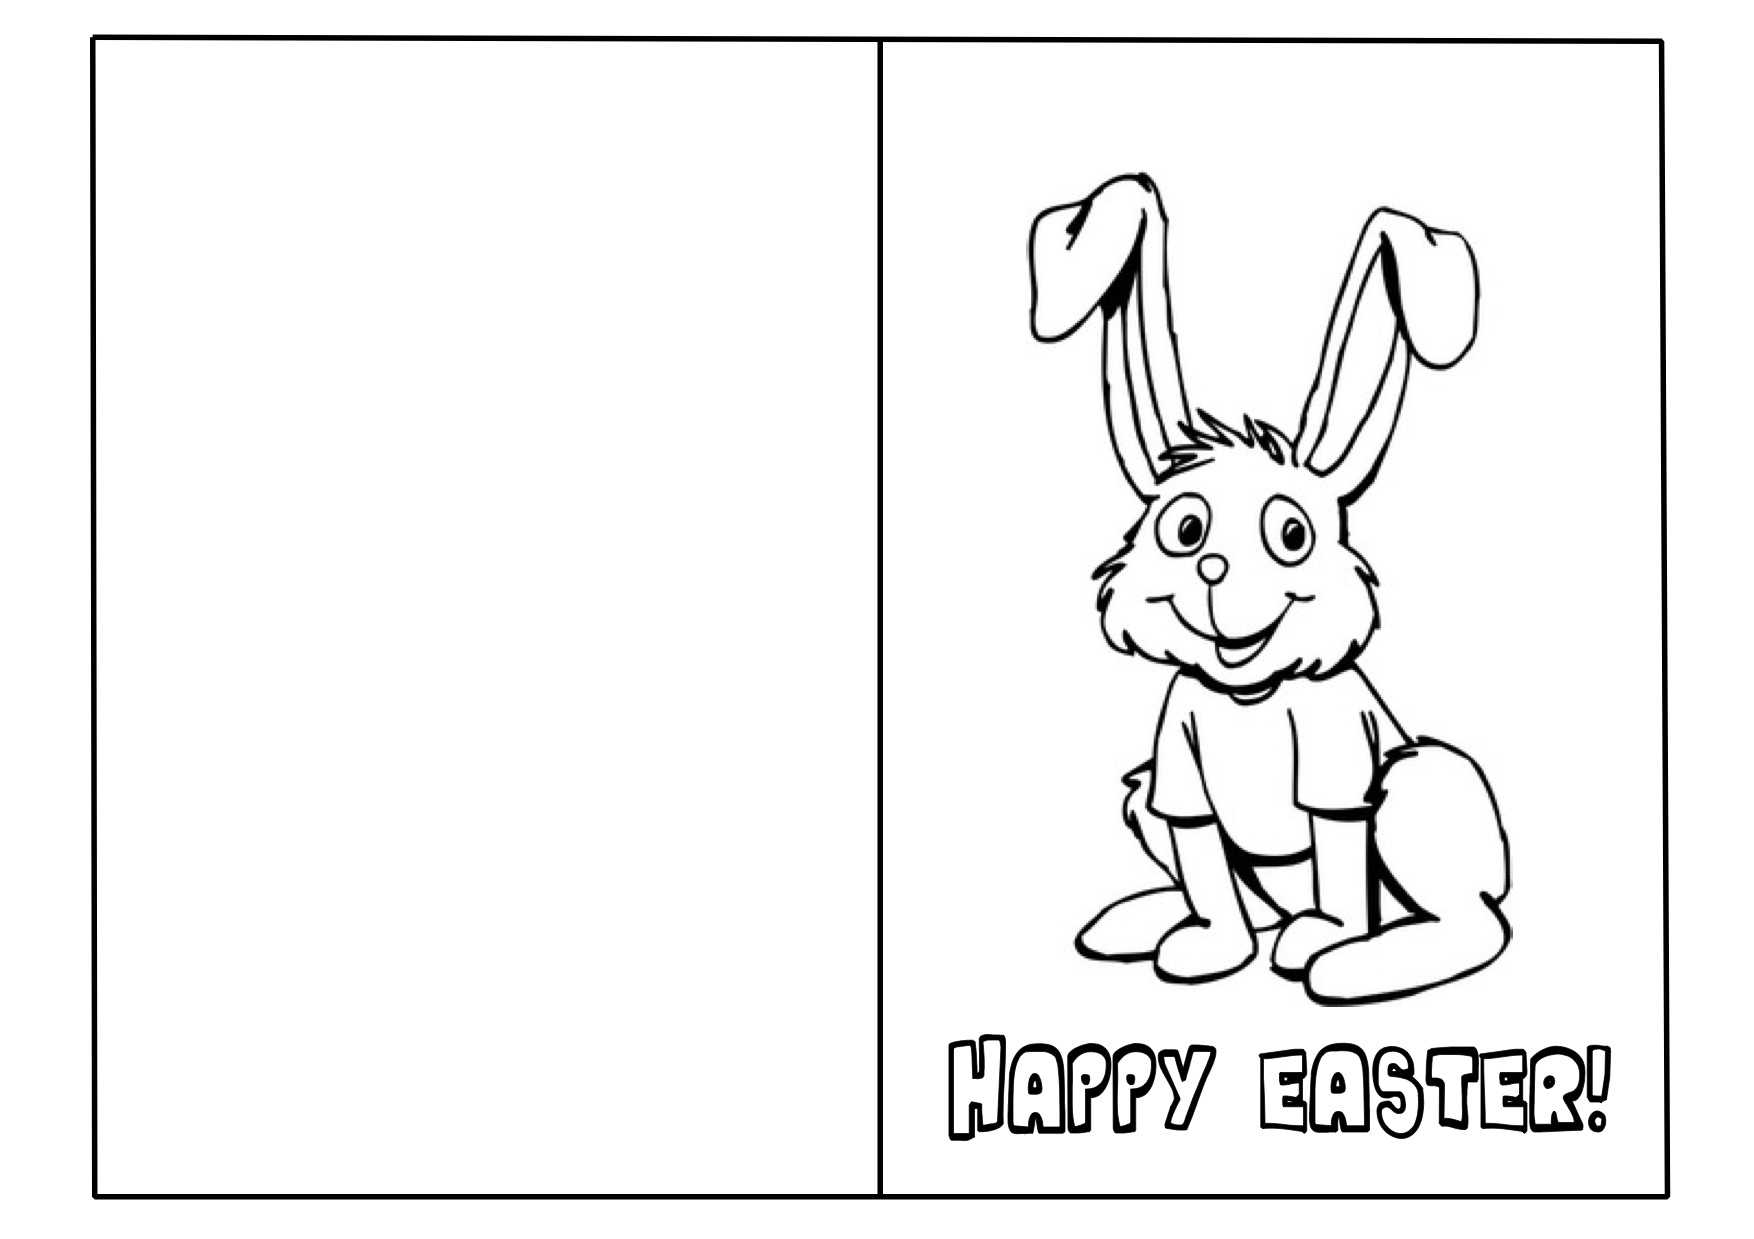 Easter Card Template Ks2 1 – Happy Easter Sunday With Regard To Easter Card Template Ks2